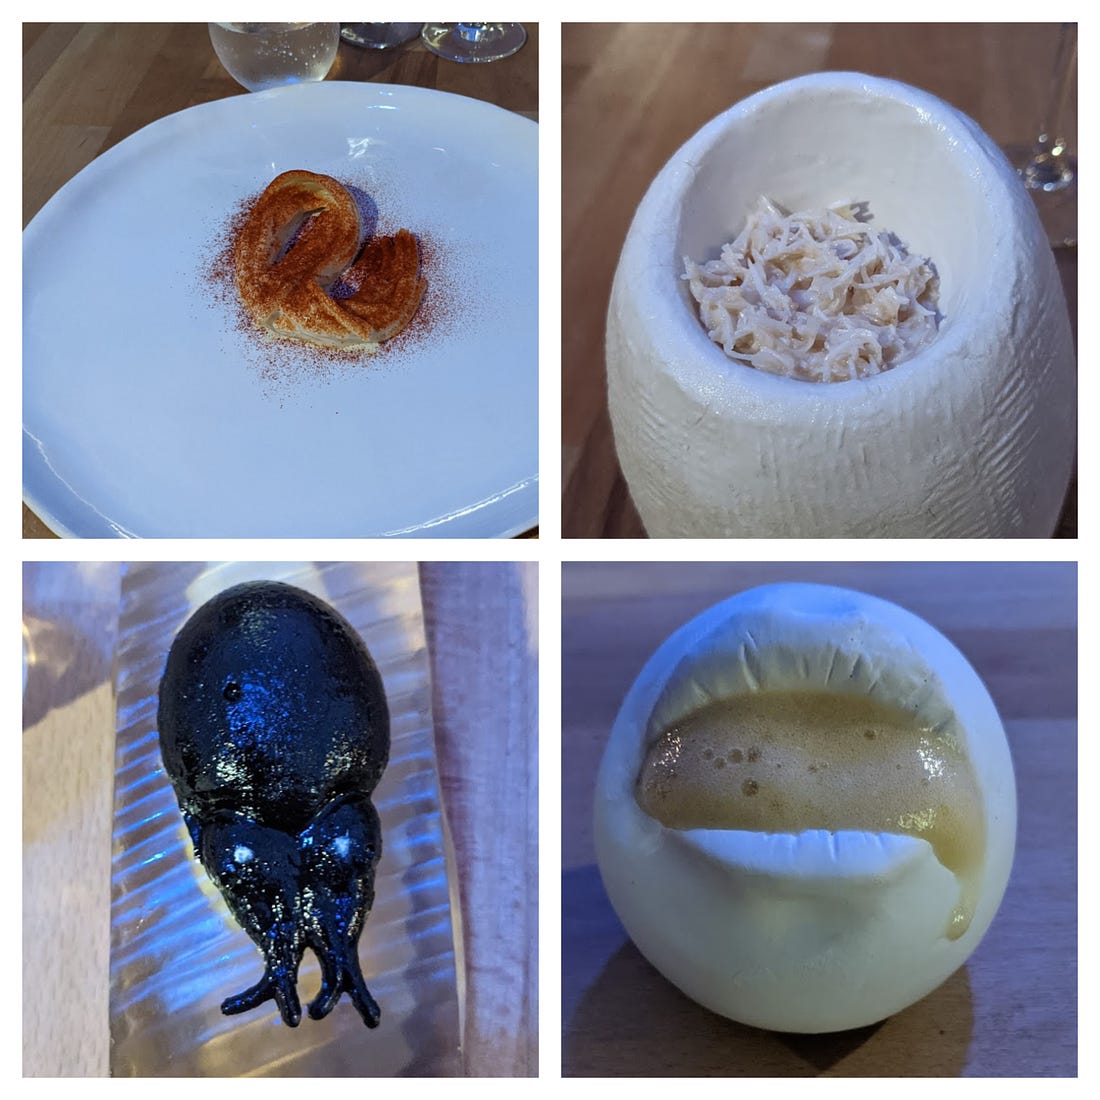 Four images from the review. Clockwise from the top left: A plate with six noodles (the largest dish of the night). A crappy looking bowl with about a teaspoon of white crabmeat that looks vaguely like cat food. A horrific shiny black blob that sort of looks like a slug. And a round ball with an actual cast of the chef’s mouth, out of which you are supposed to lick a truly repellent looking greenish-tan foam.